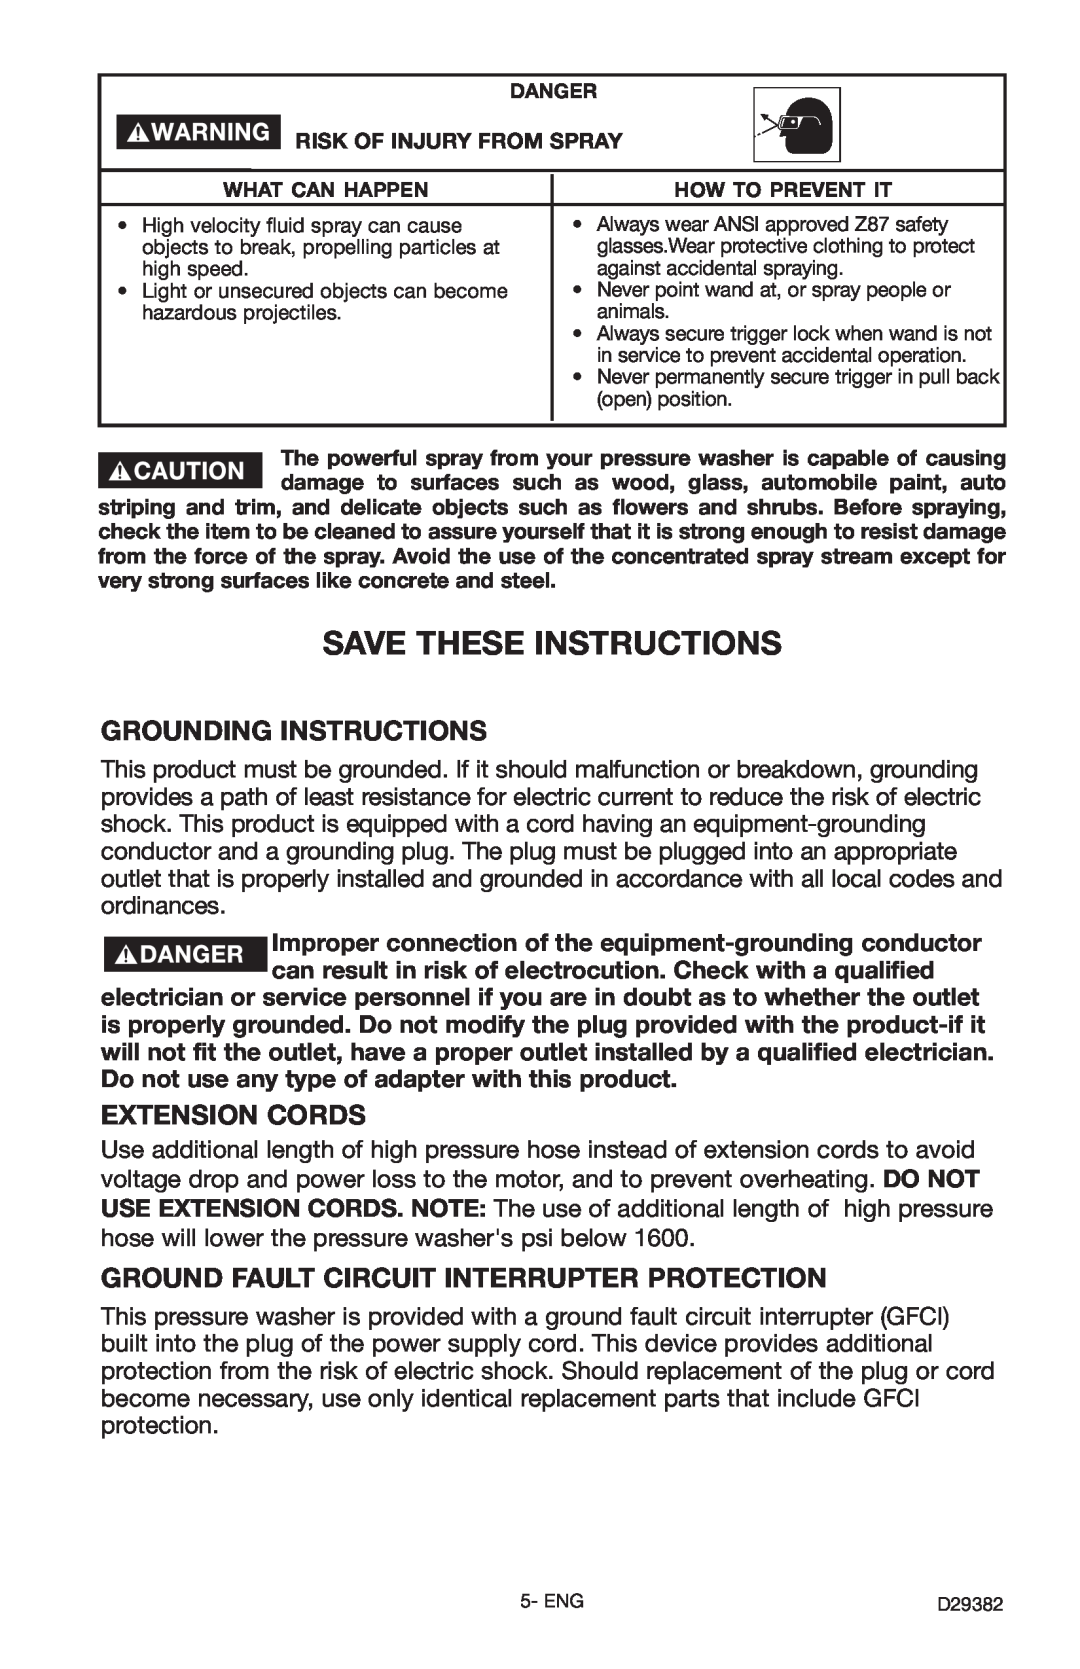 Delta D29382 Save These Instructions, Grounding Instructions, Extension Cords, Ground Fault Circuit Interrupter Protection 